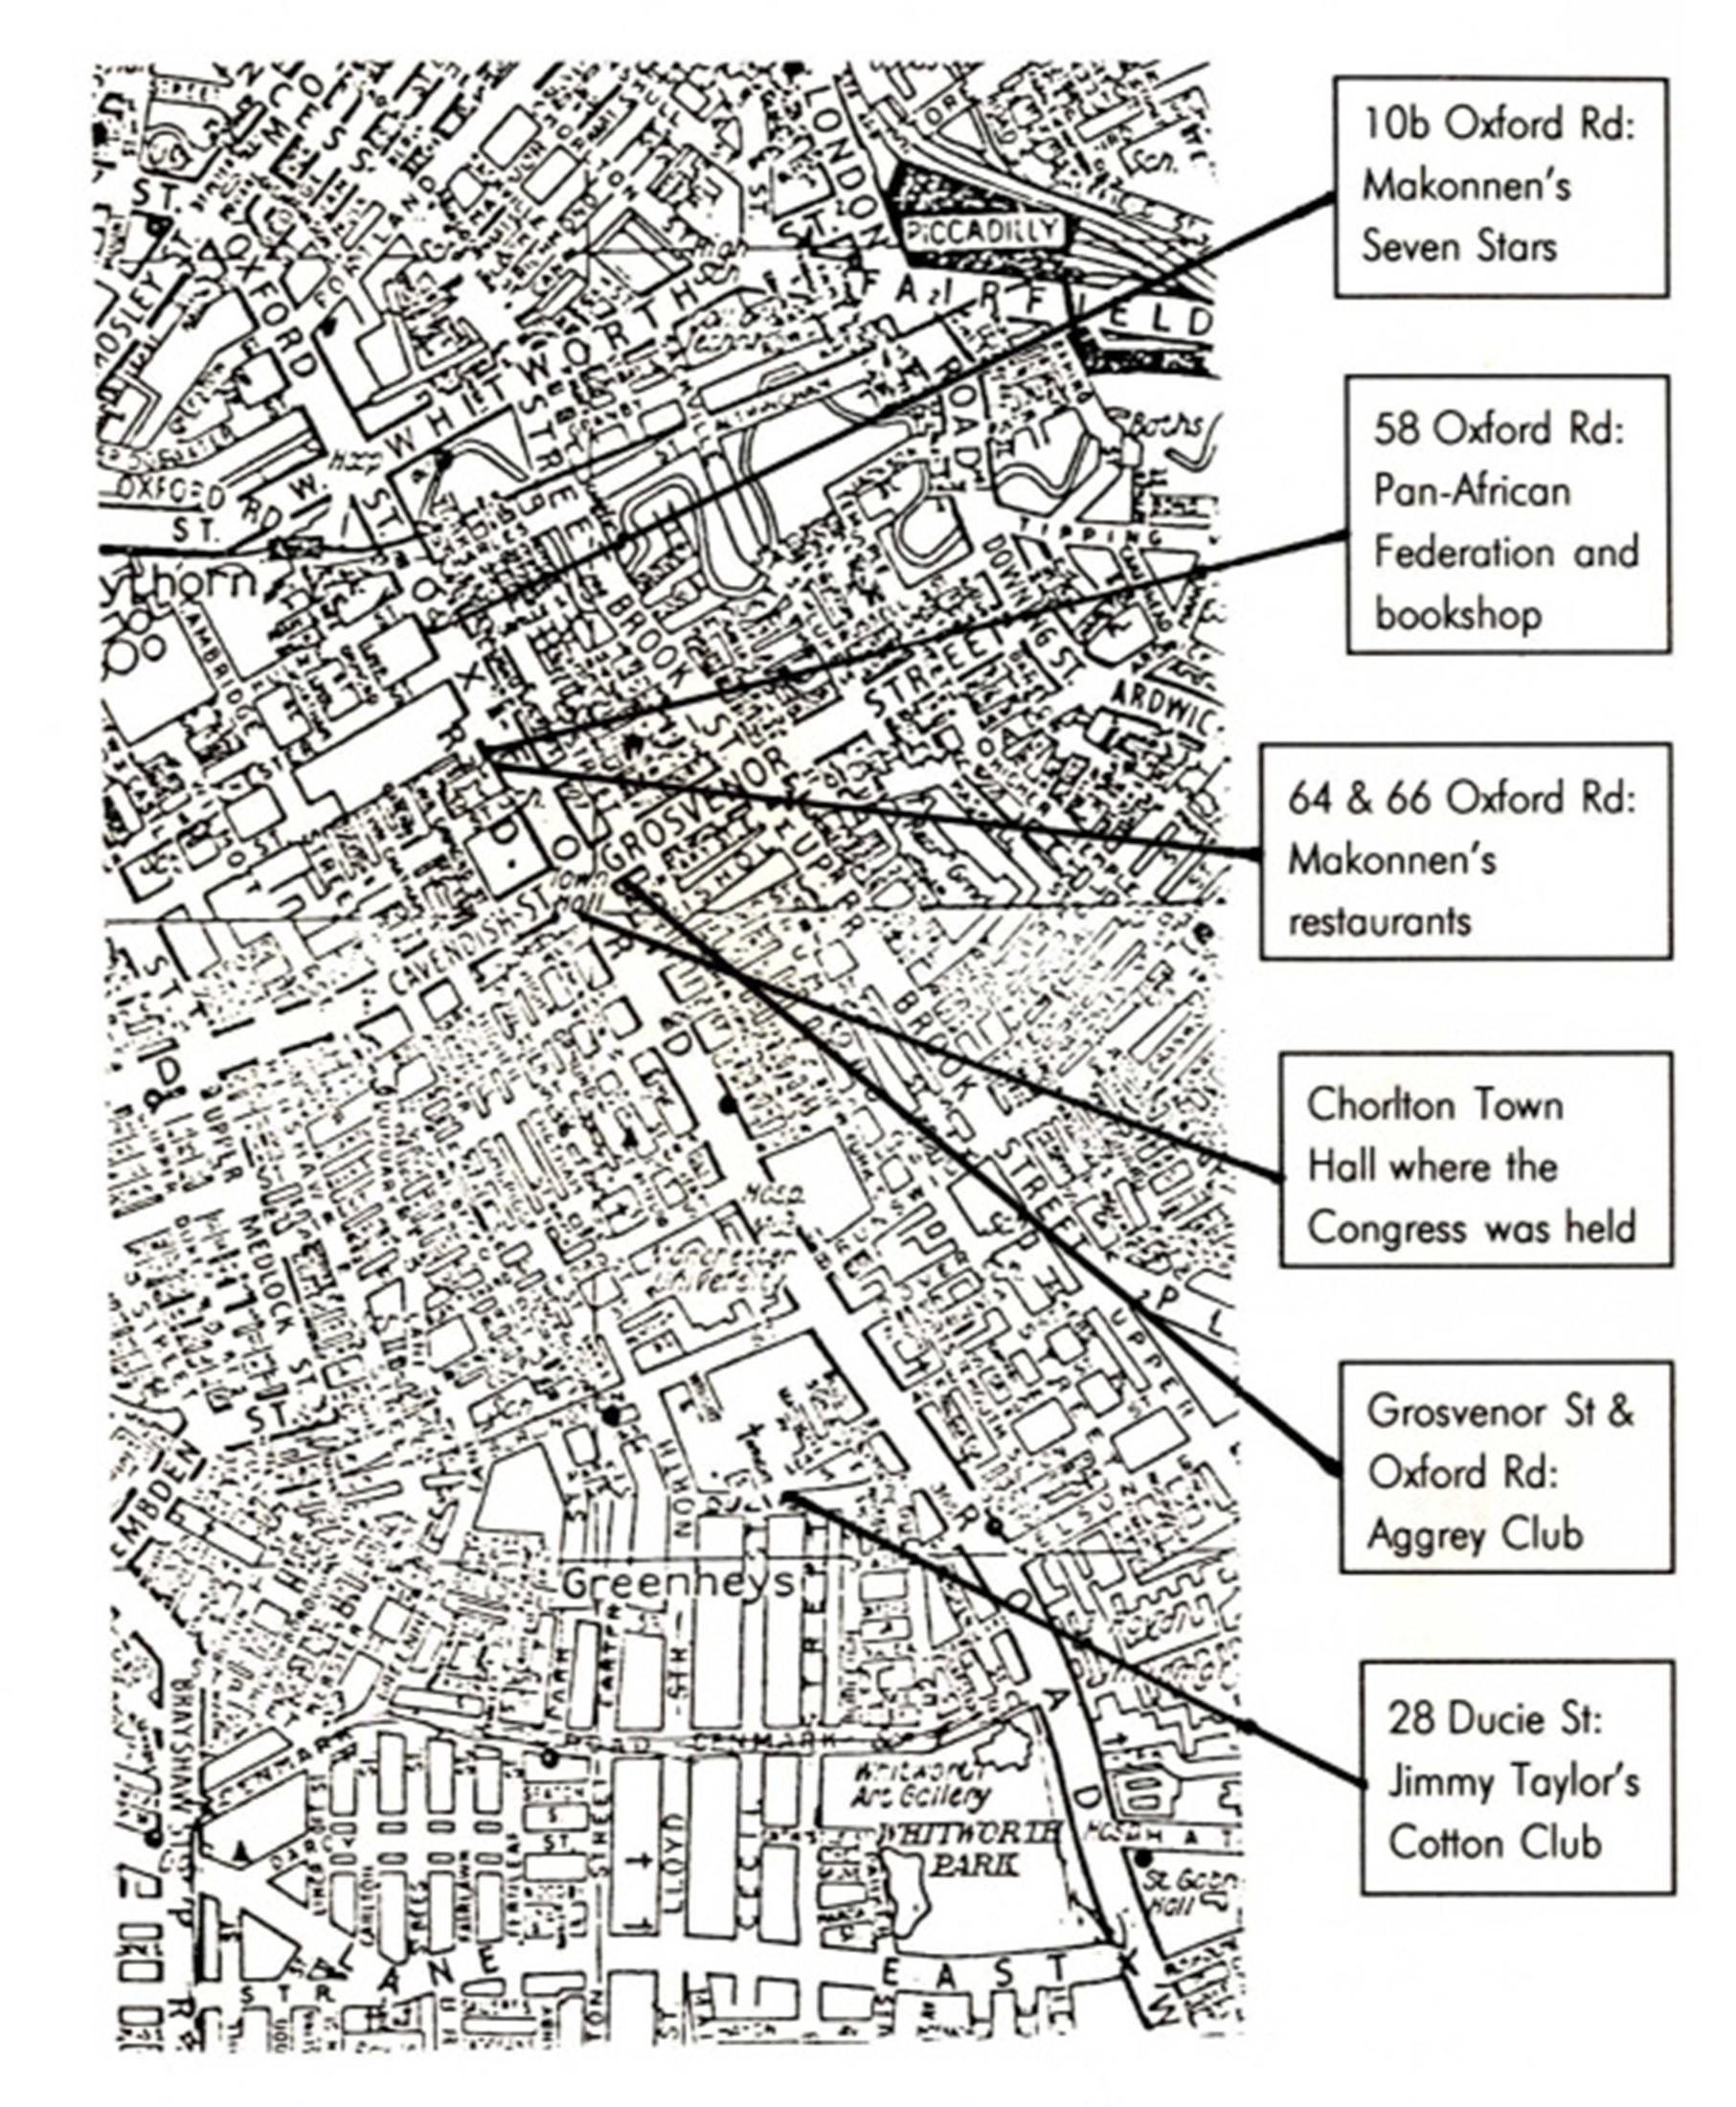 Map showing Important sites for the Black Community in Manchester, 1945